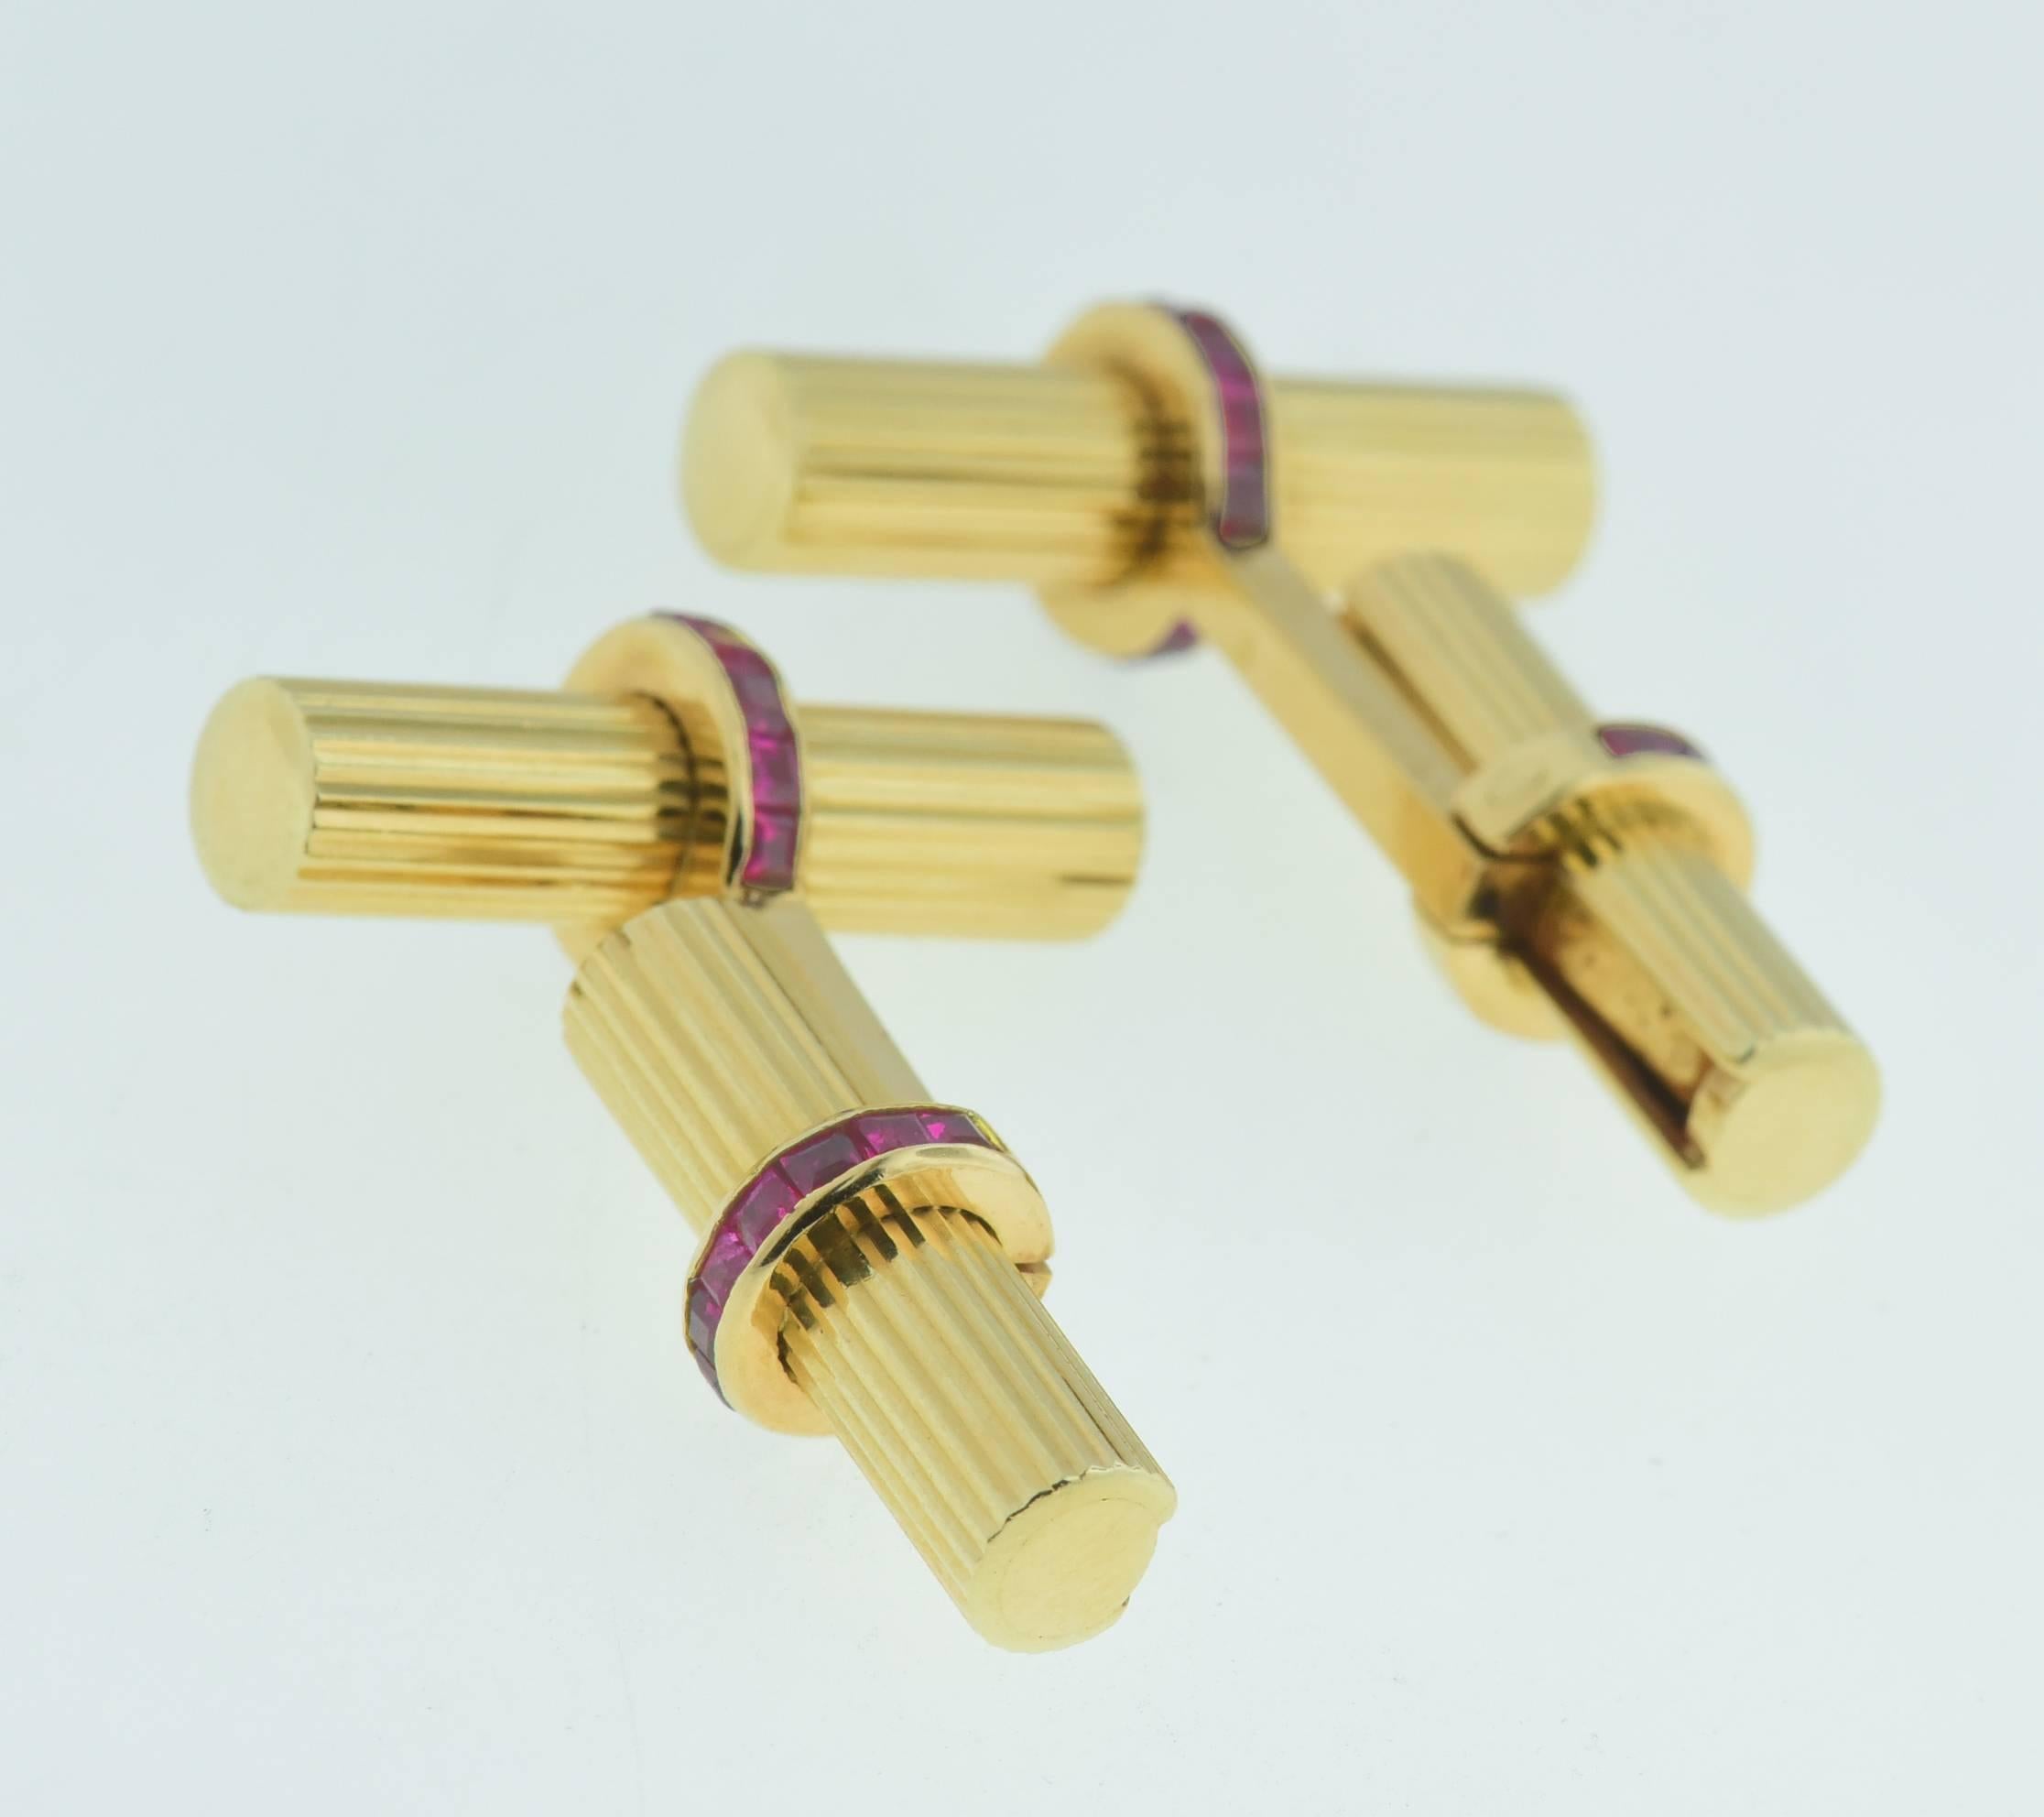 Elegant Vintage Double Bar Cufflinks,by Van Cleef & Arpels; circa 1970's. Crafted in14k yellow gold, set with vibrant & beautiful calibré-cut rubies. Cufflinks signed V.C.A, NY, 14K, serial#12v3.30.